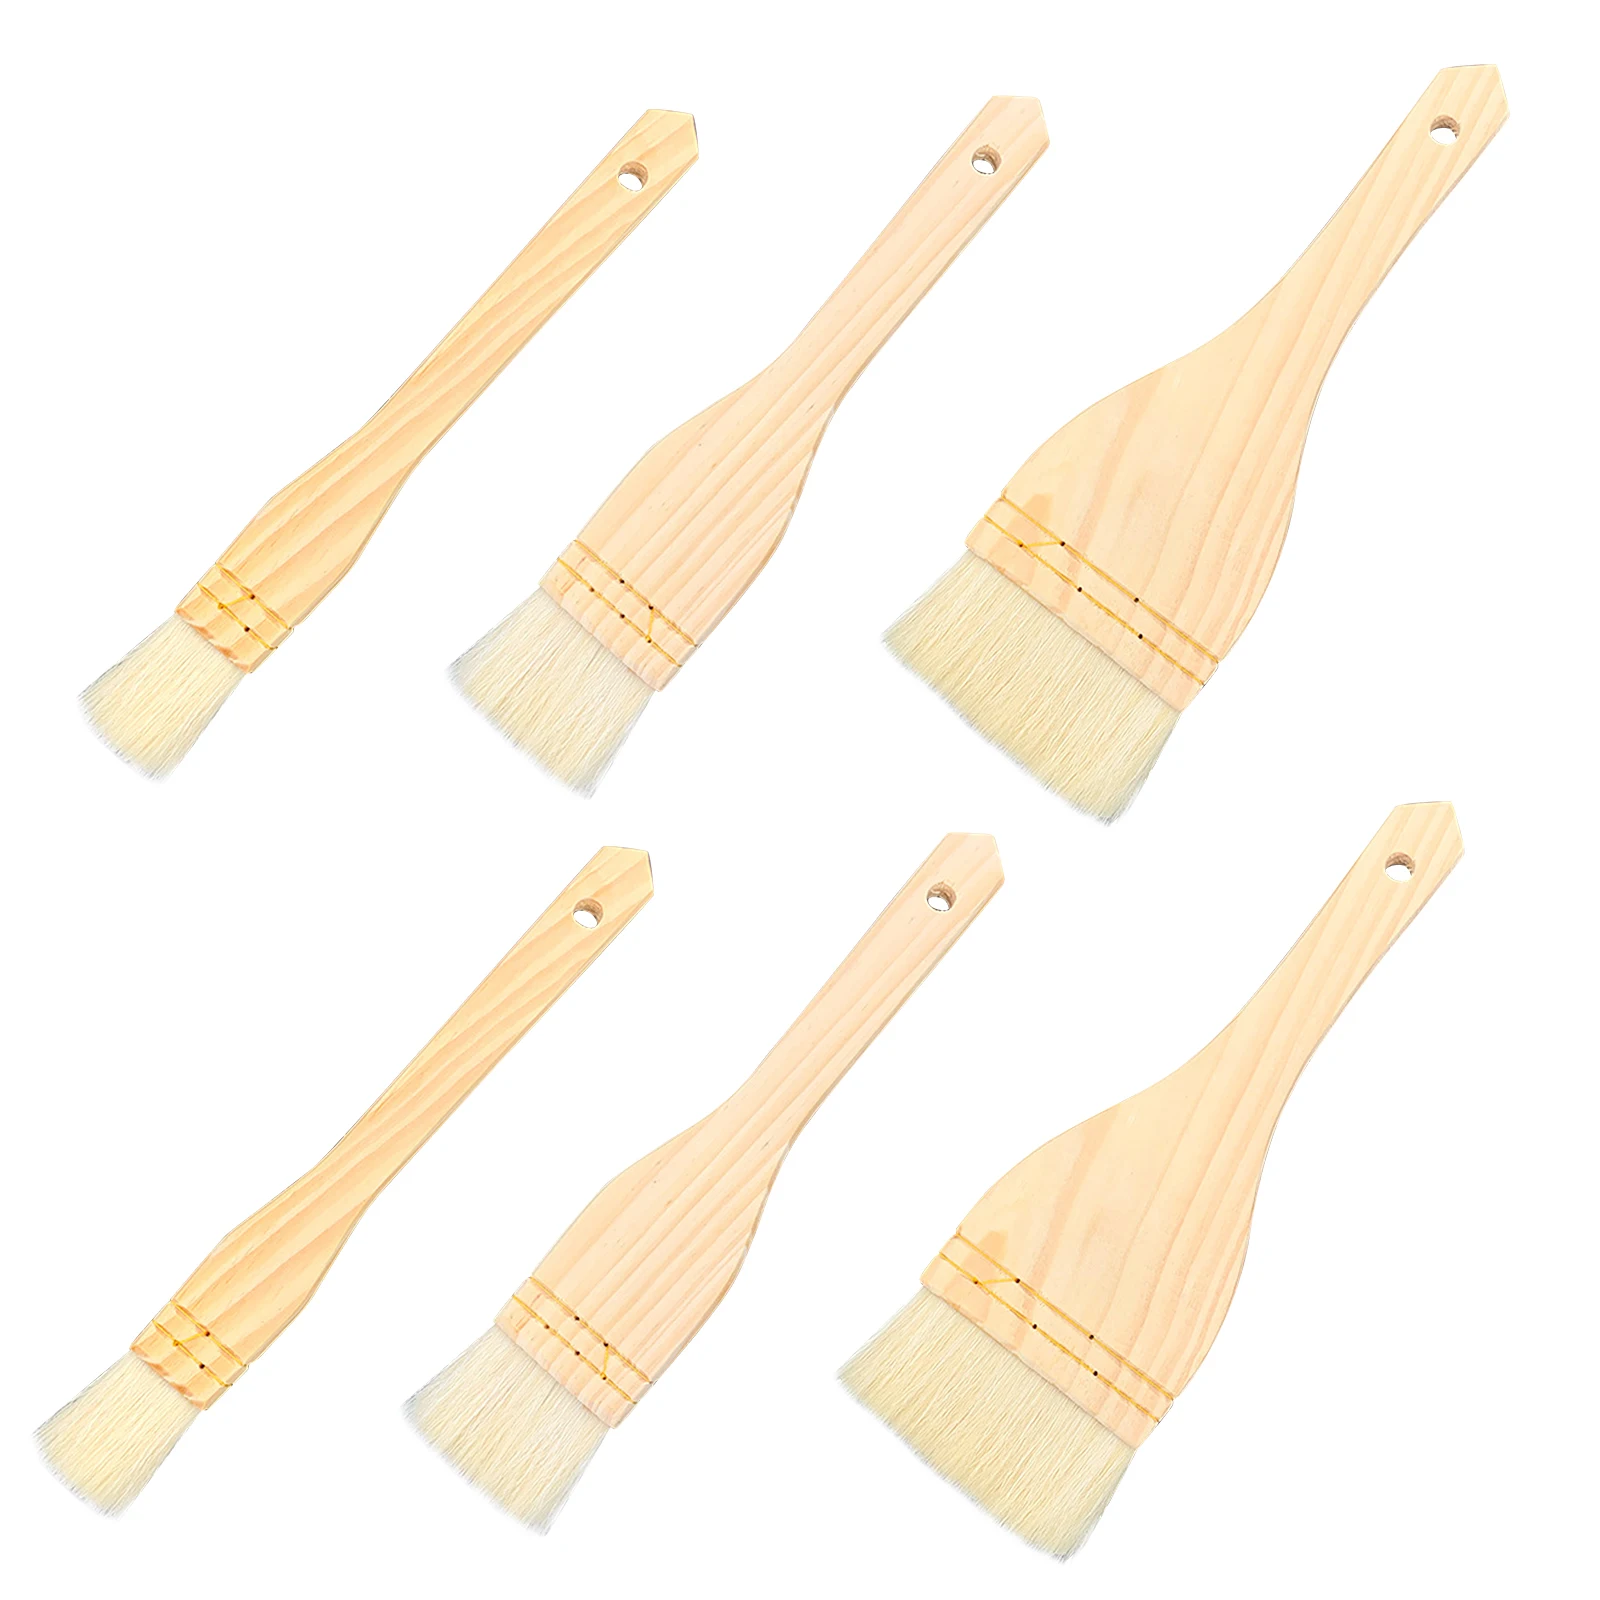 6pcs Assorted Size Soft Bristles Artist Painting Gift With Handle Portable Flat Hake Brush For Watercolor Professional Wash